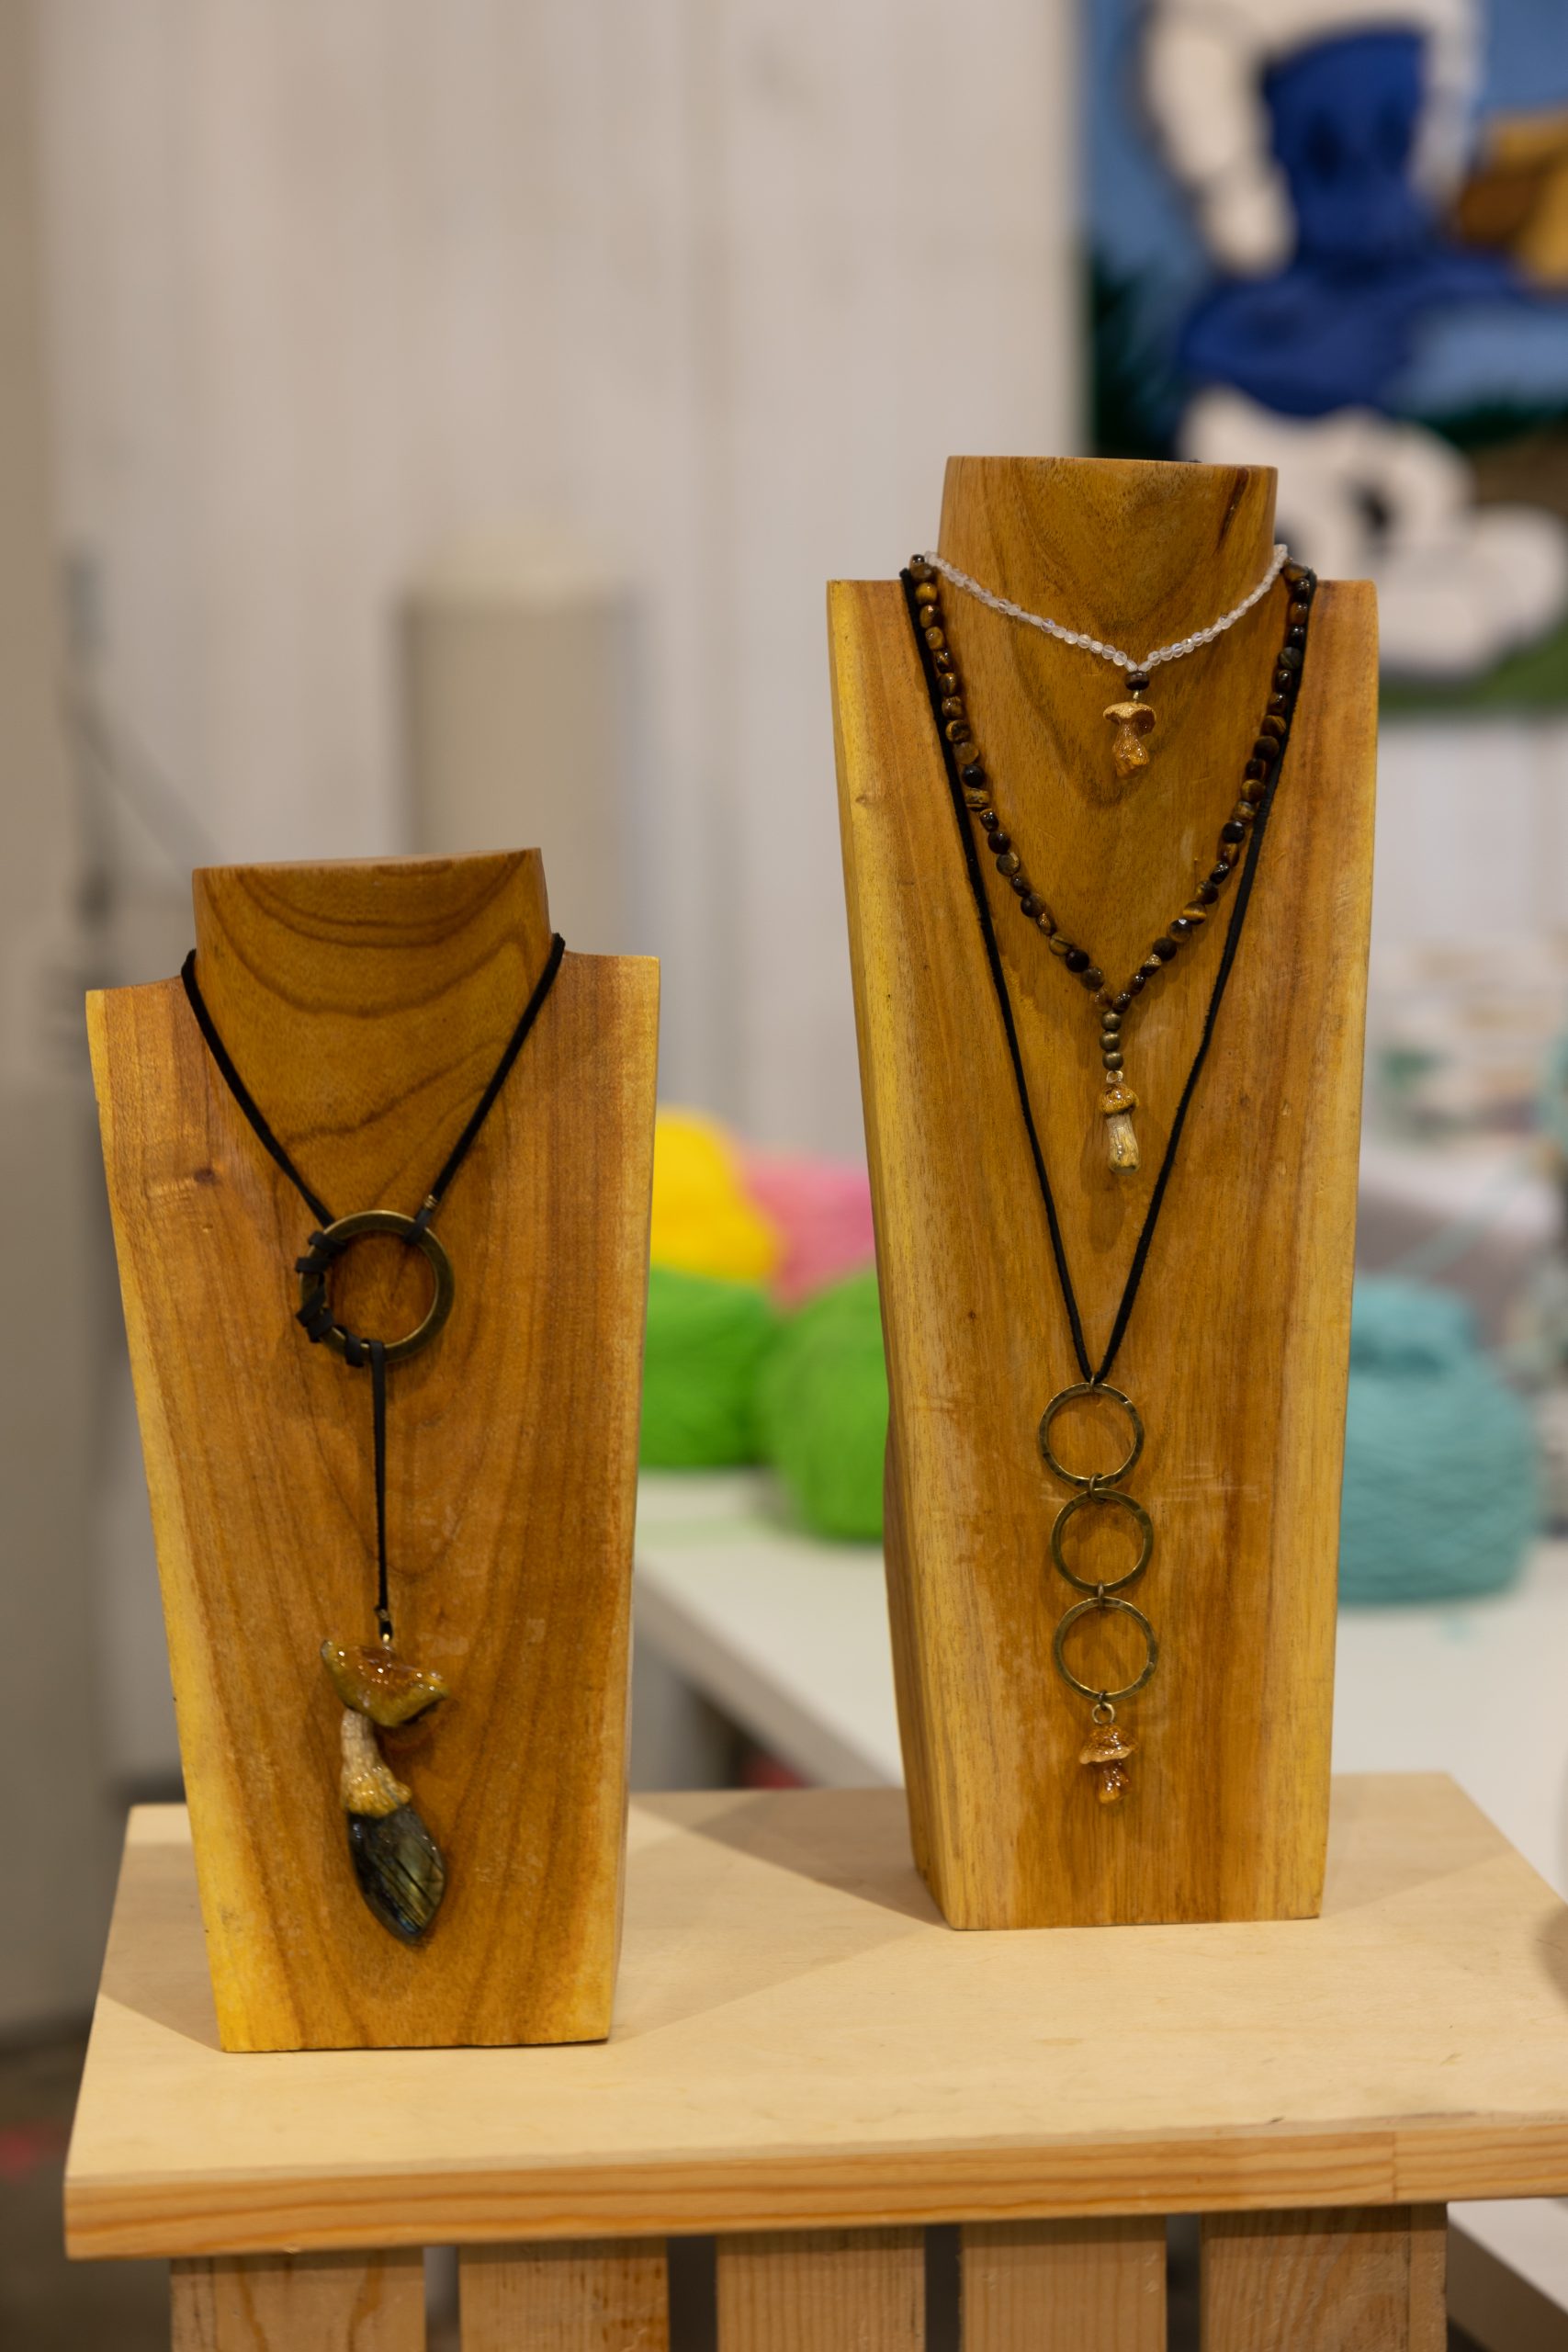 Handmade necklaces on display